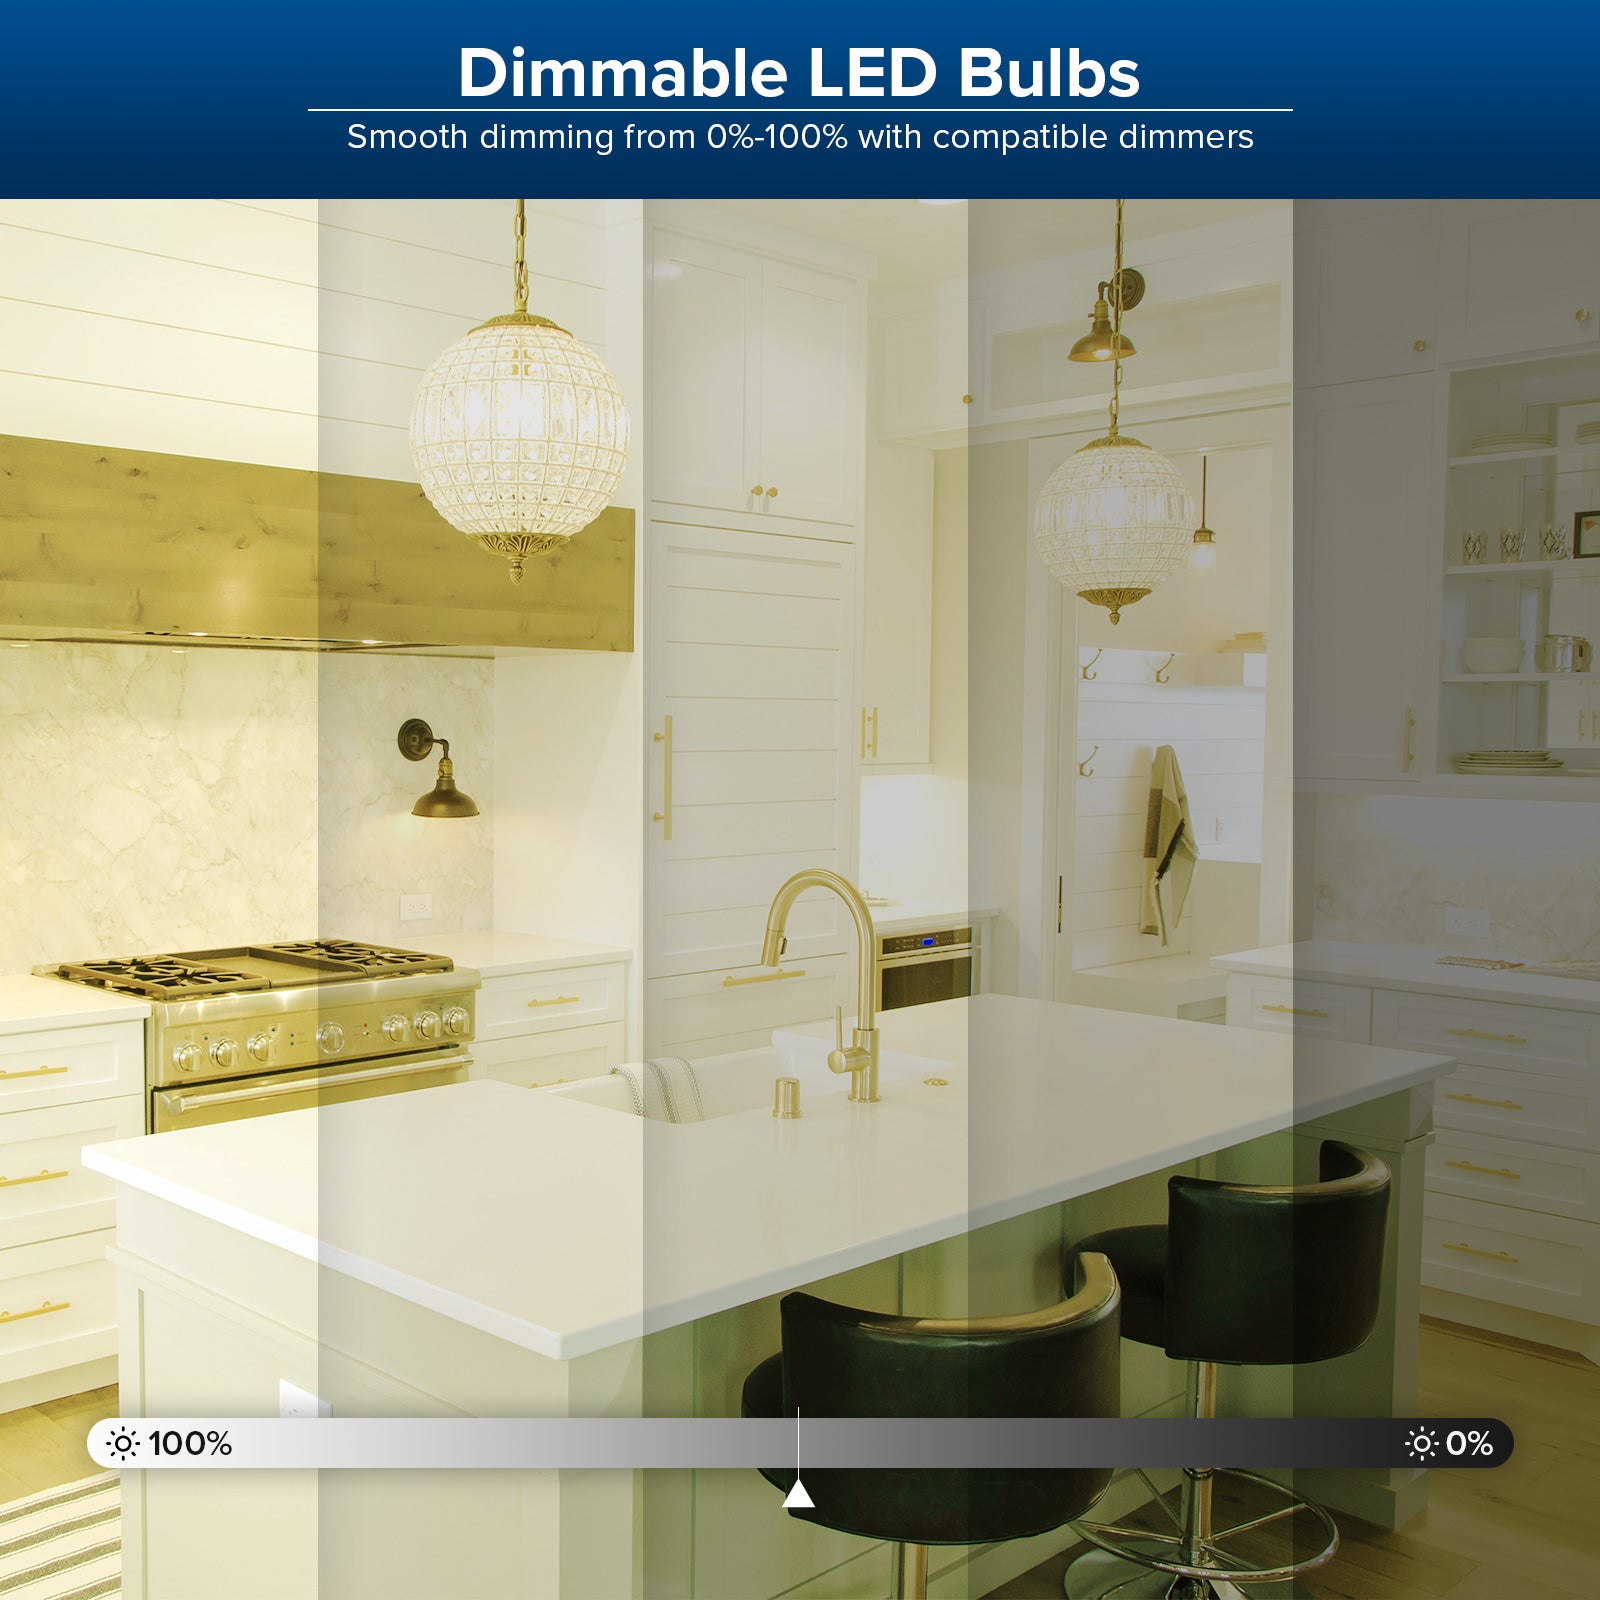 Dimmable LED 3000K Bulbs,Smooth dimming from 0%-100% with compatible dimmers.